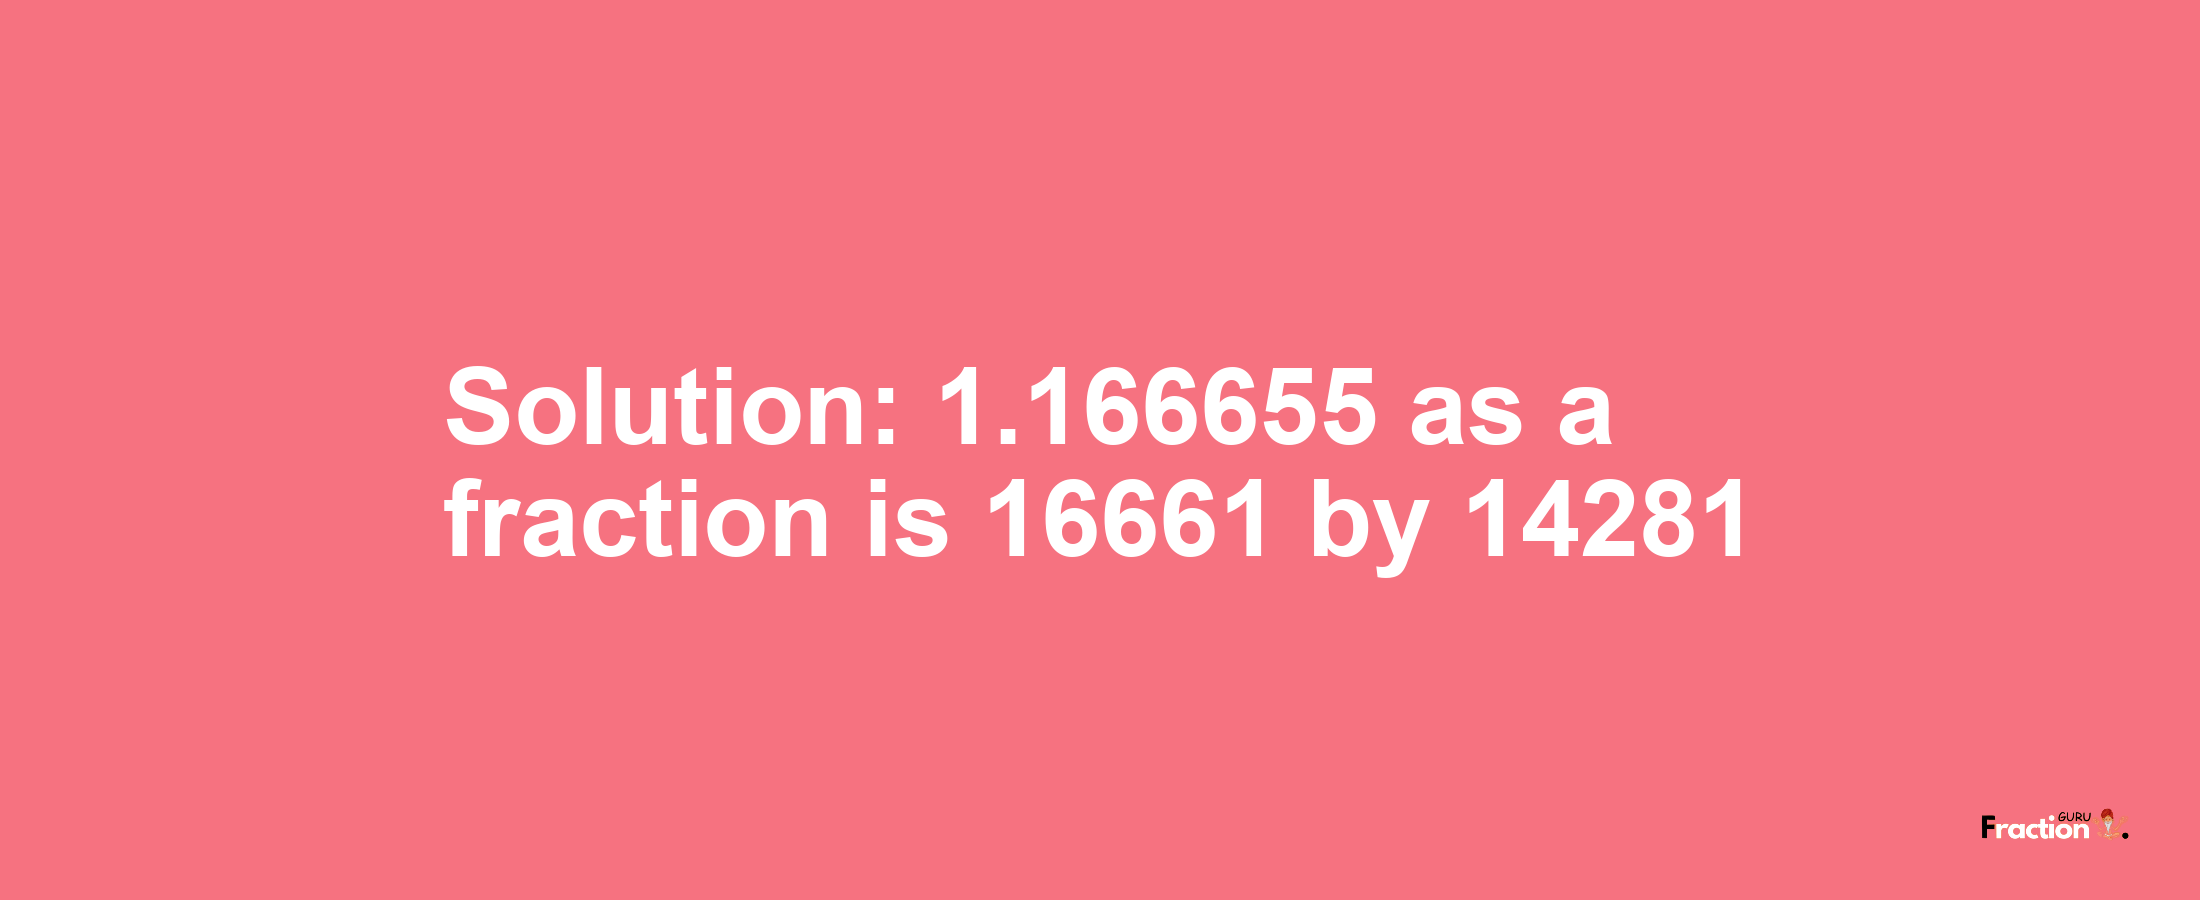 Solution:1.166655 as a fraction is 16661/14281